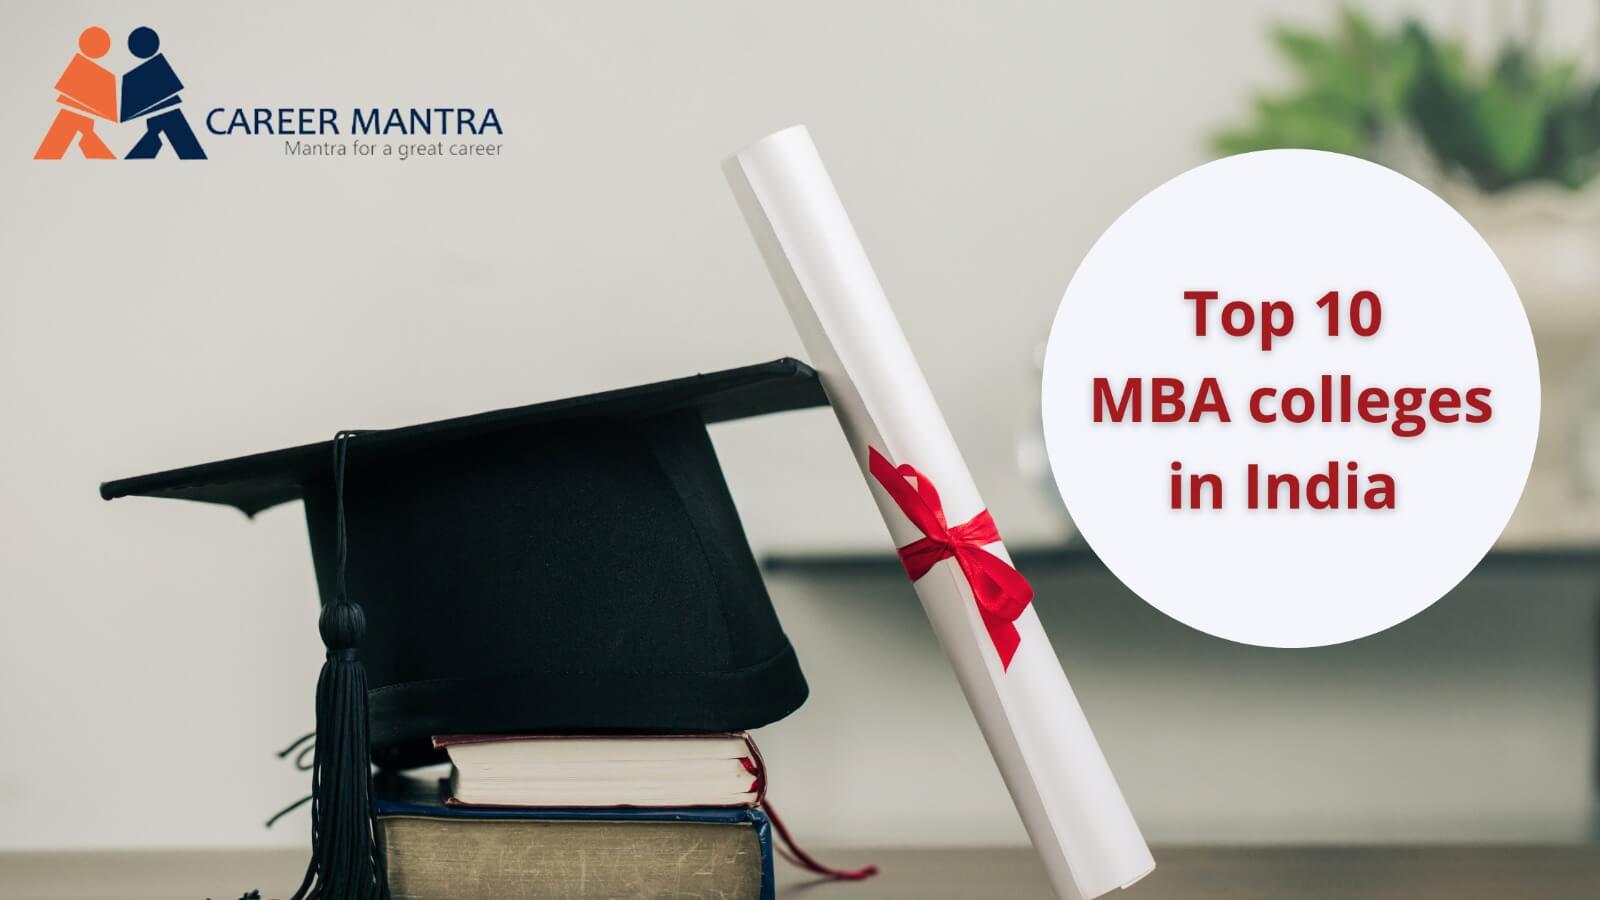 https://www.careermantra.net/blog/top-10-mba-colleges-in-india/